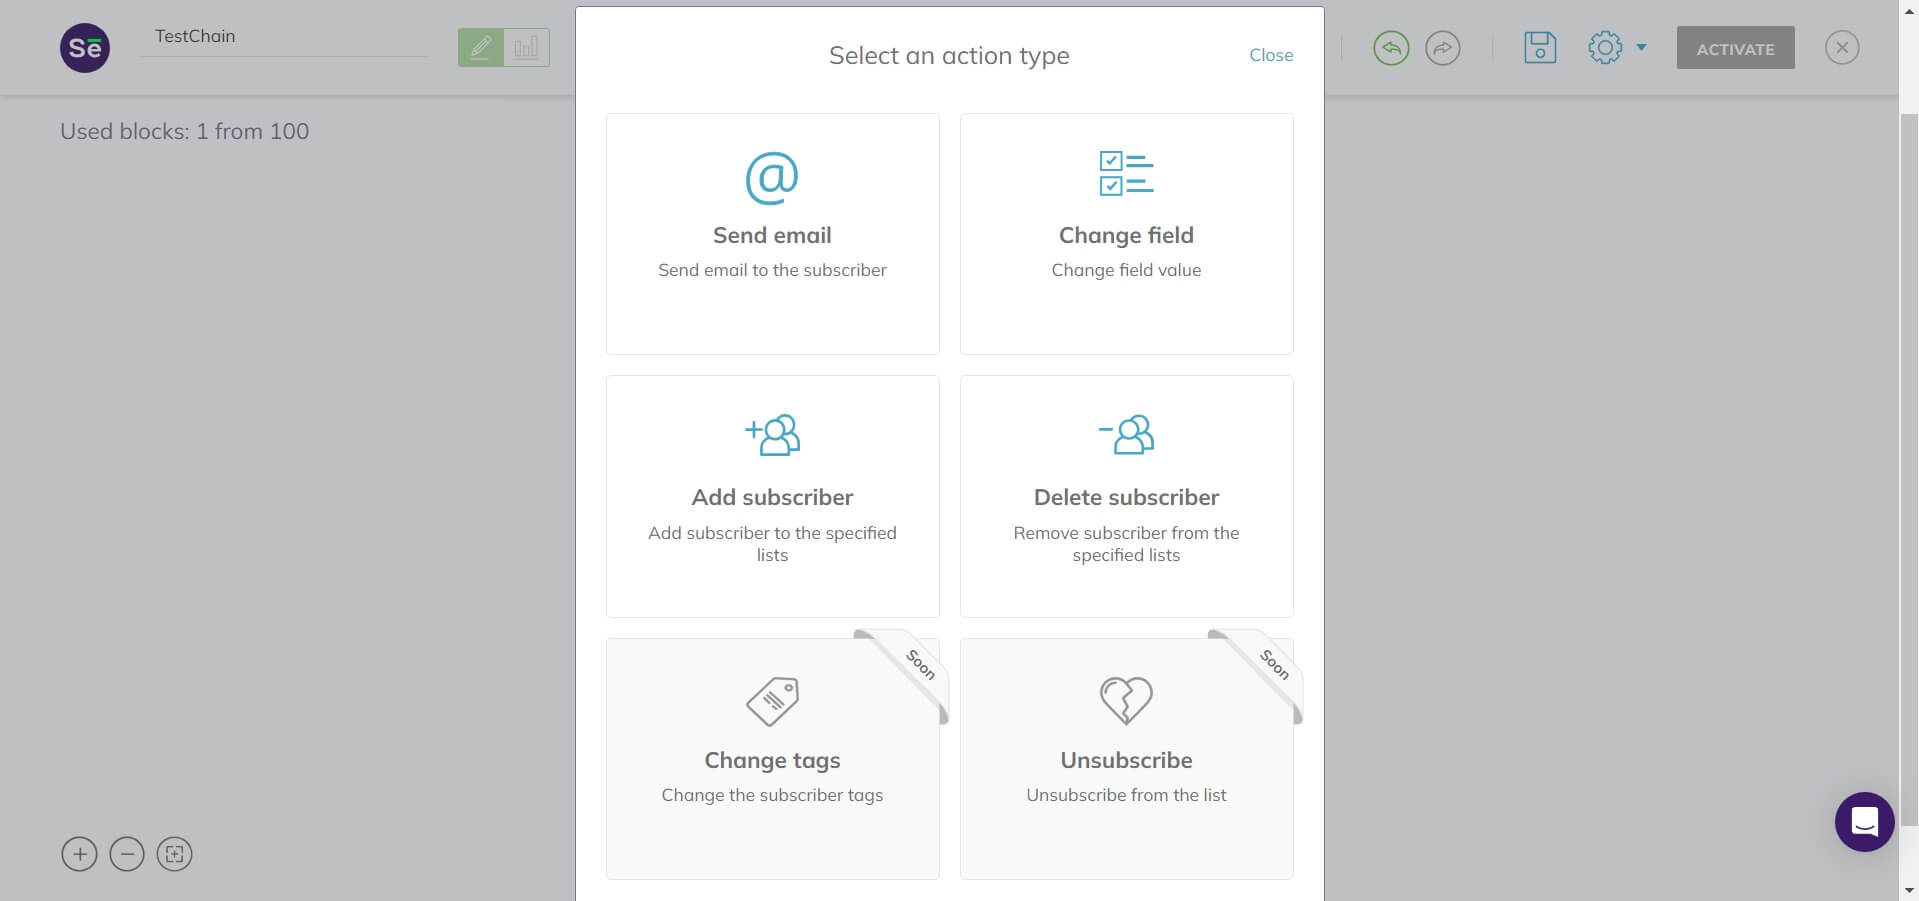 Action types in Selzy: Send email, Change field, Add subscriber, and Delete subscriber options available